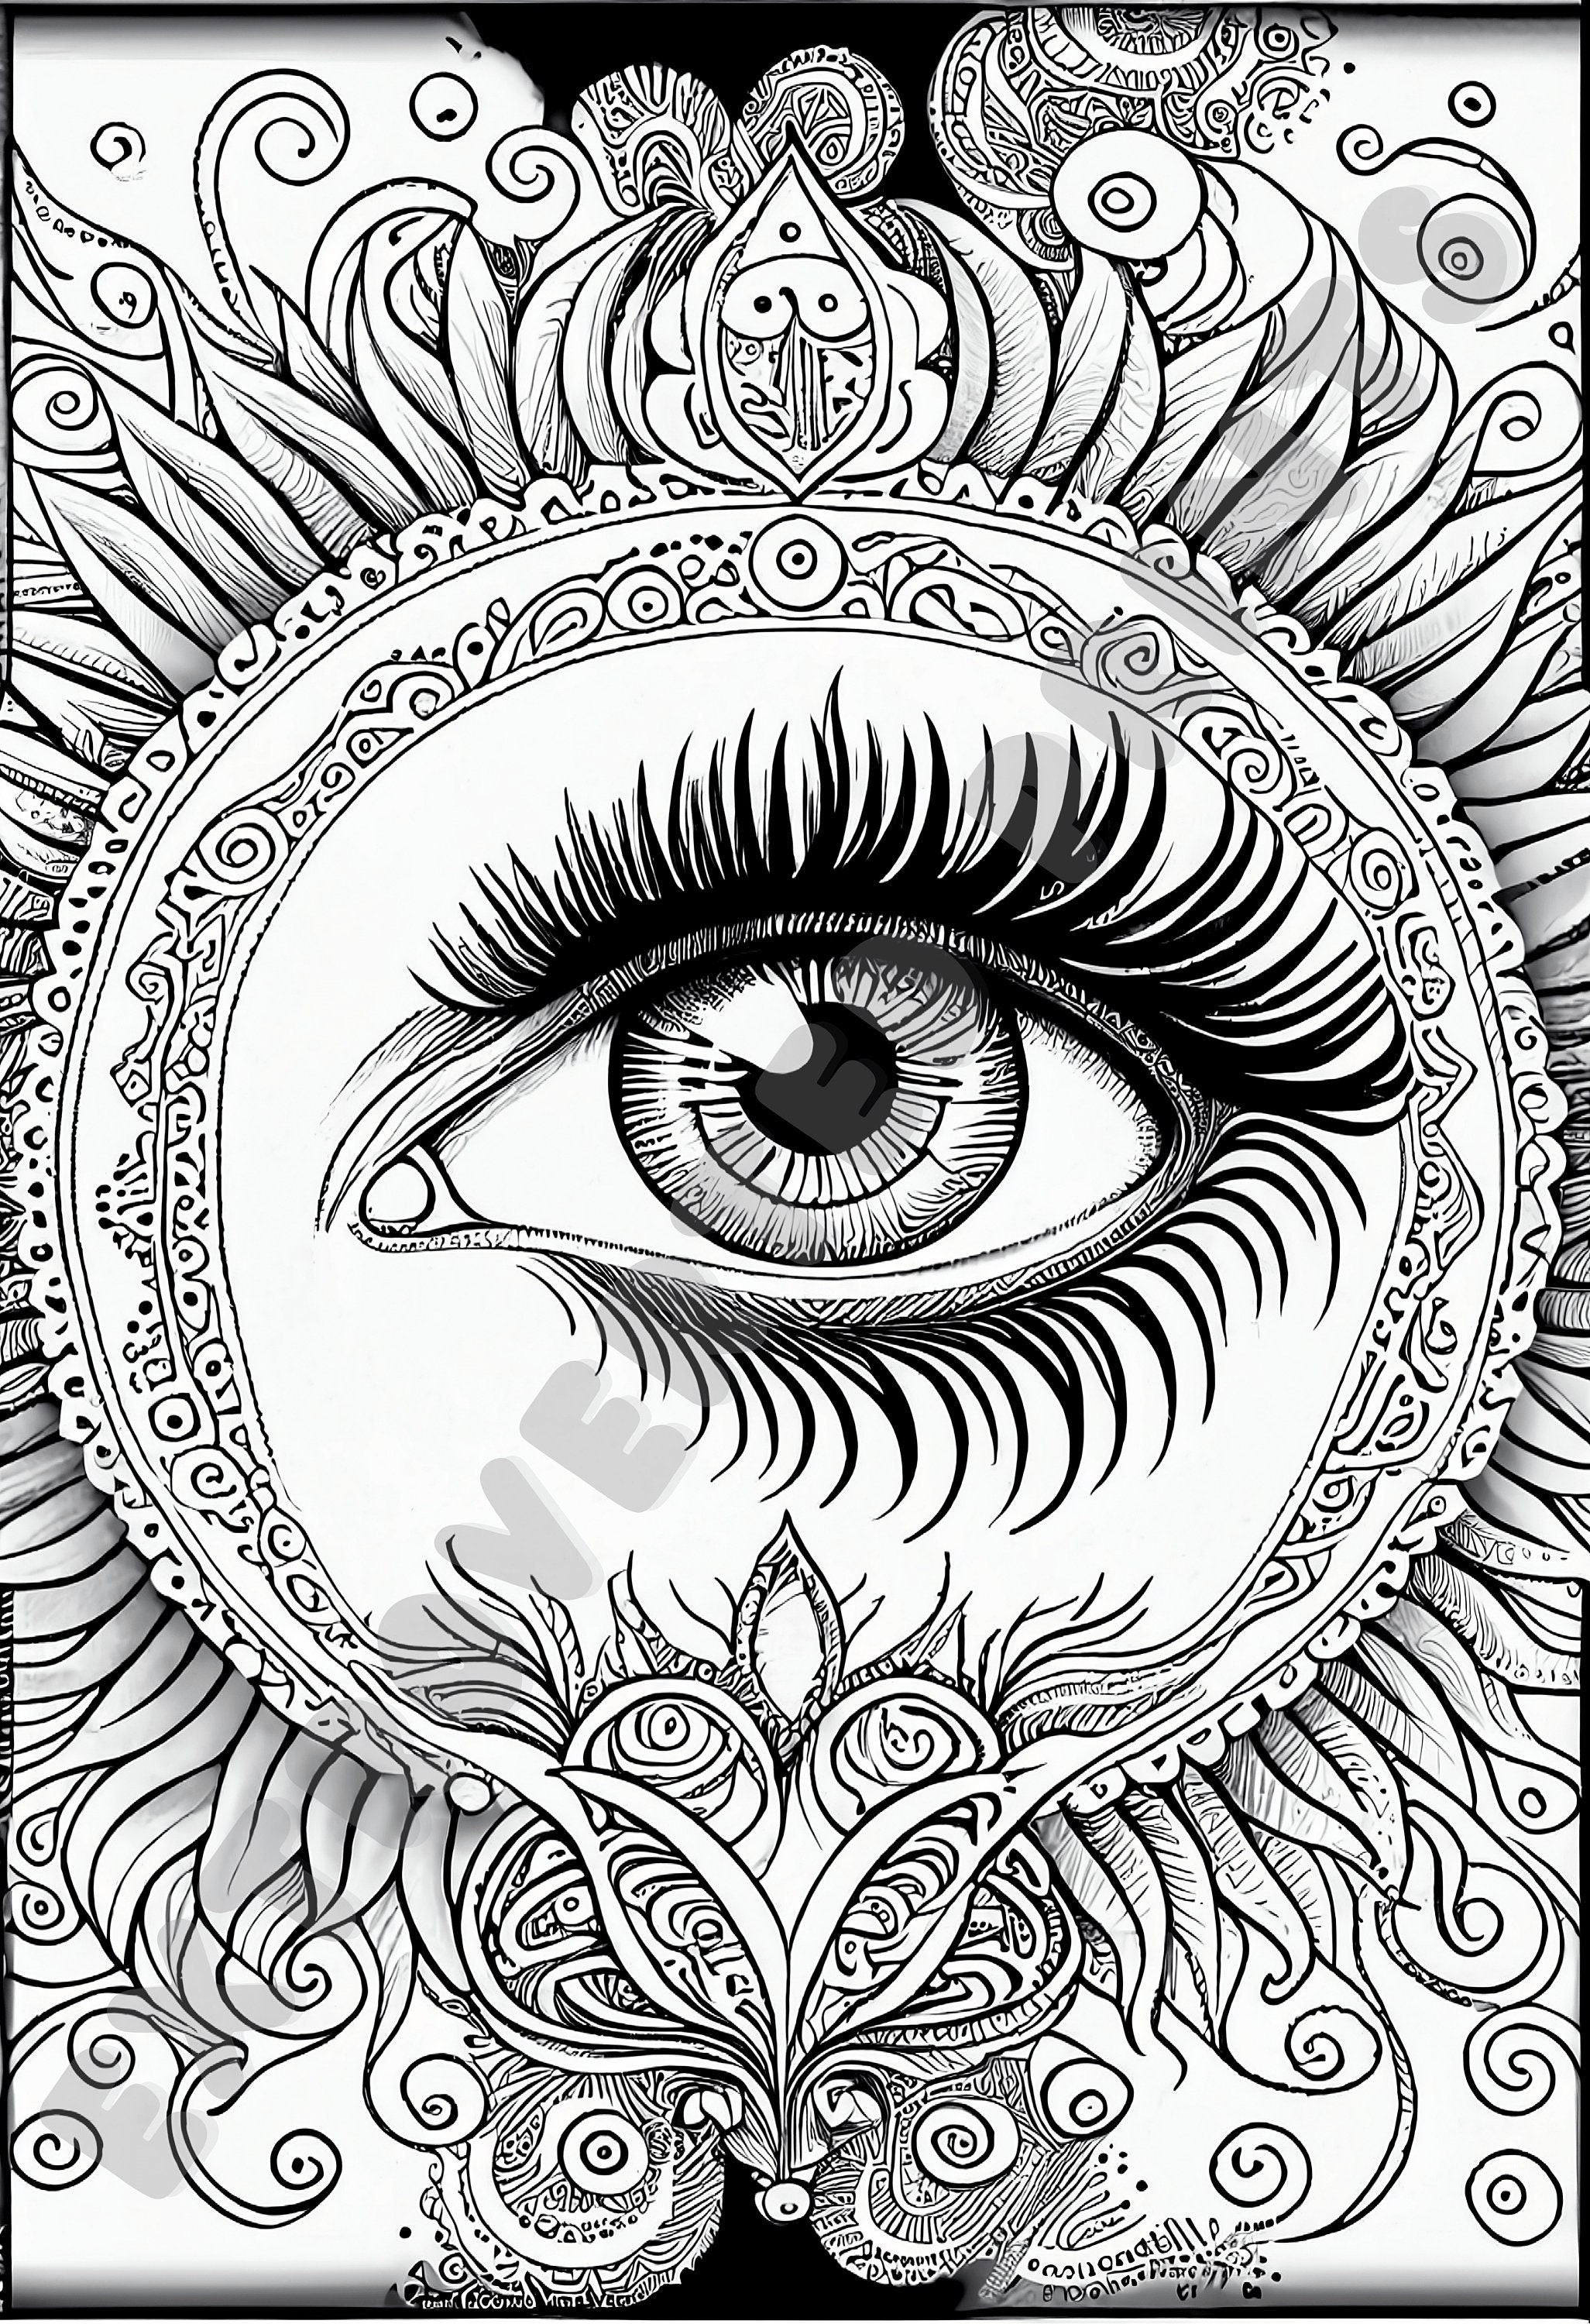 Your third eye coloring page for kids and adults who experience adhd anxiety relaxin meditation instant digital download pdf file instant download